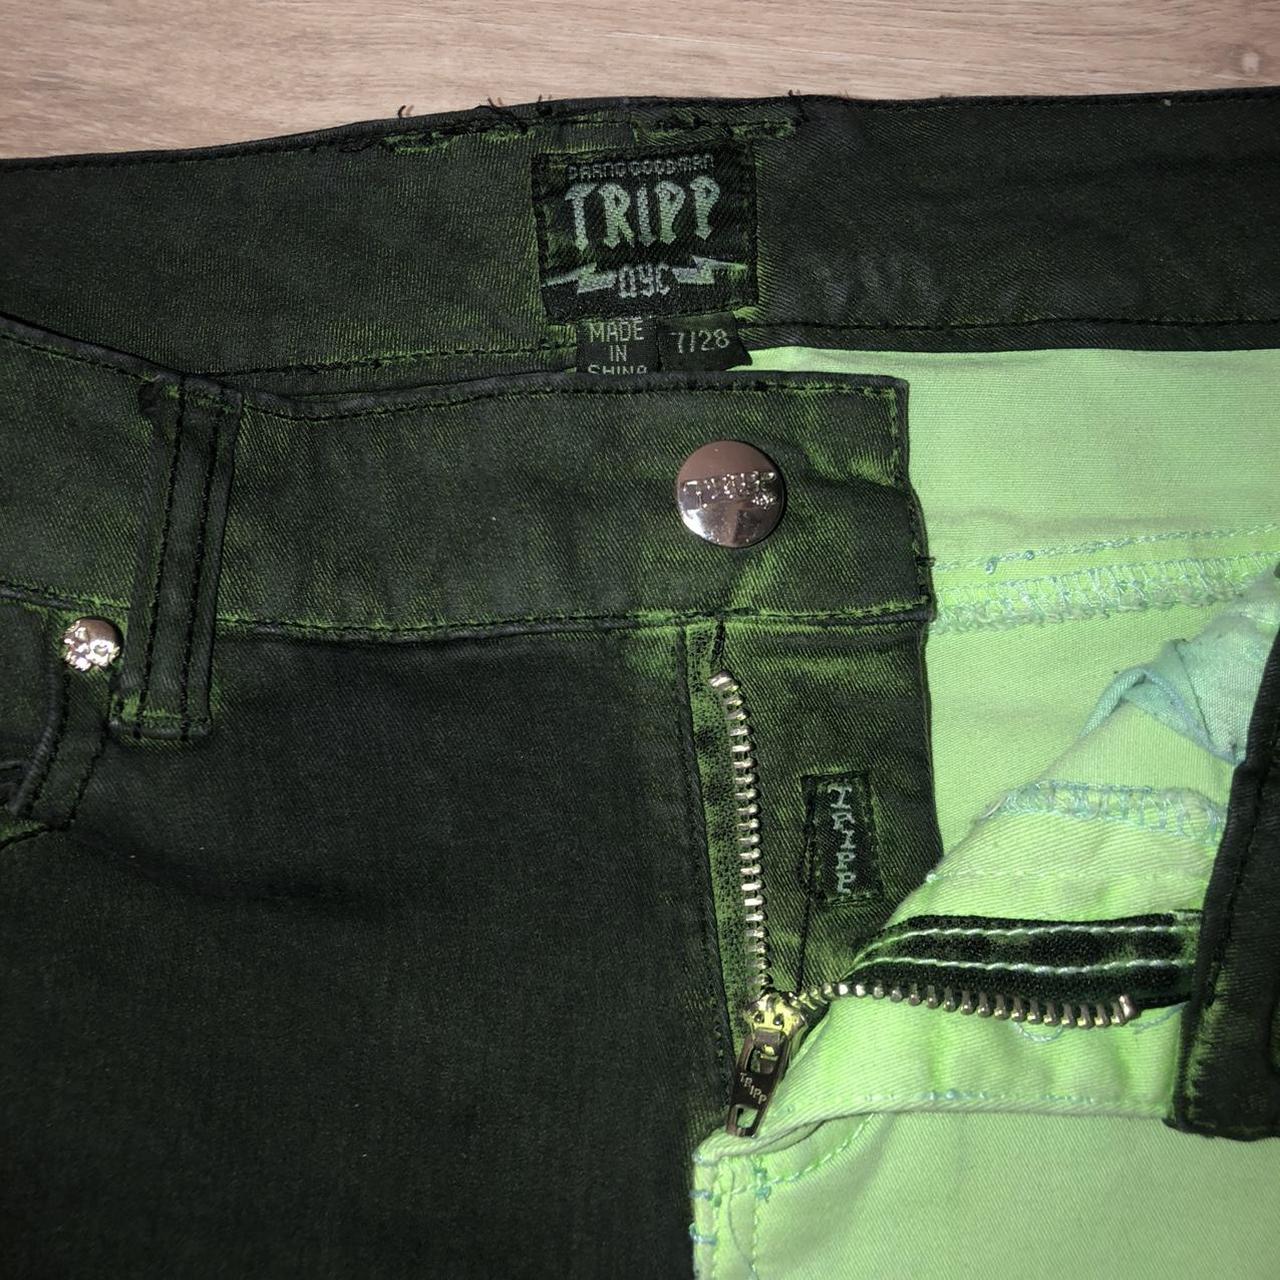 Toxic Neon Green Tripp pants🖤💚 These pants are so - Depop